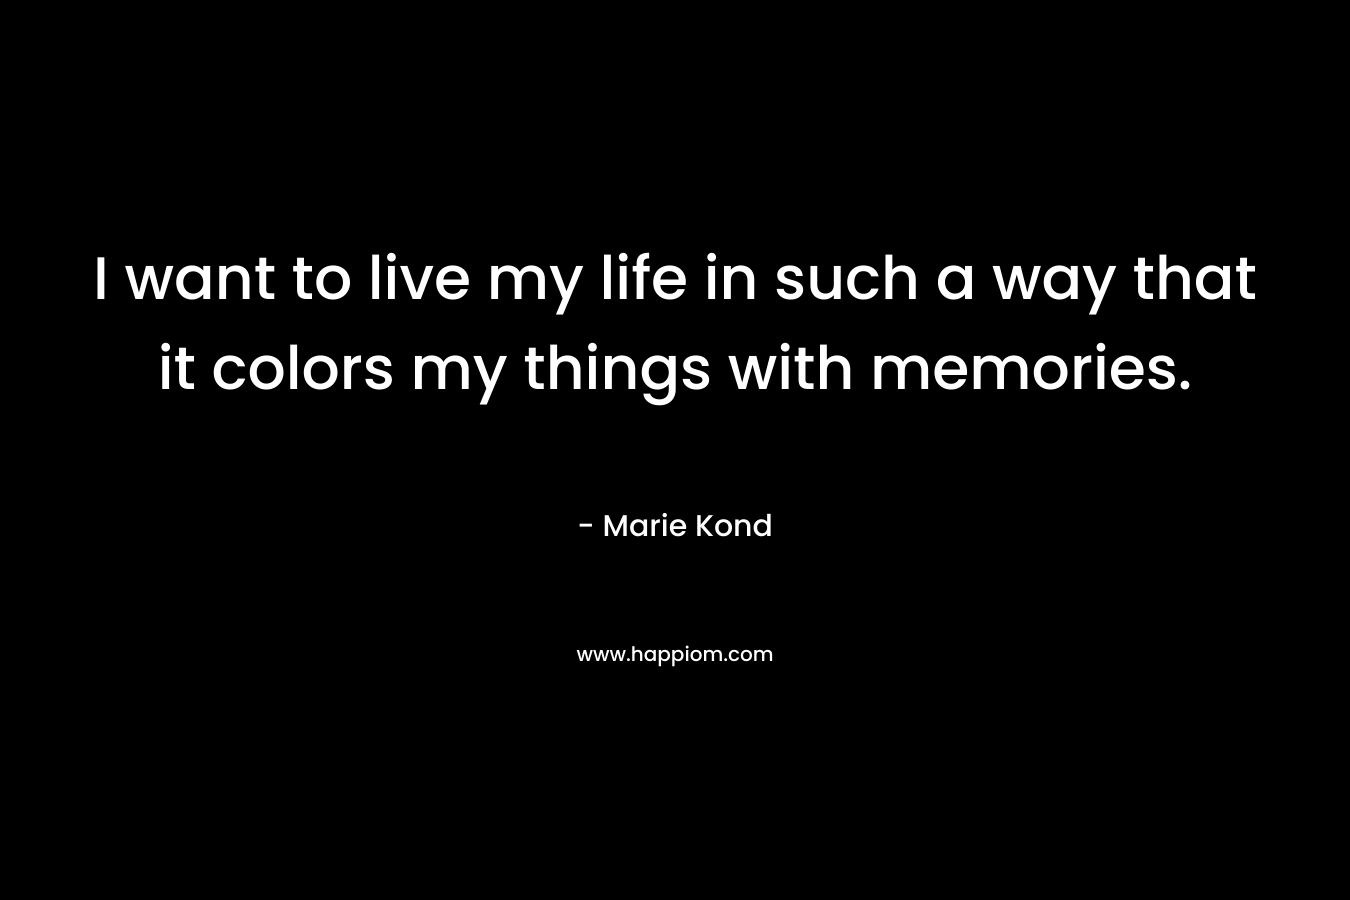 I want to live my life in such a way that it colors my things with memories.